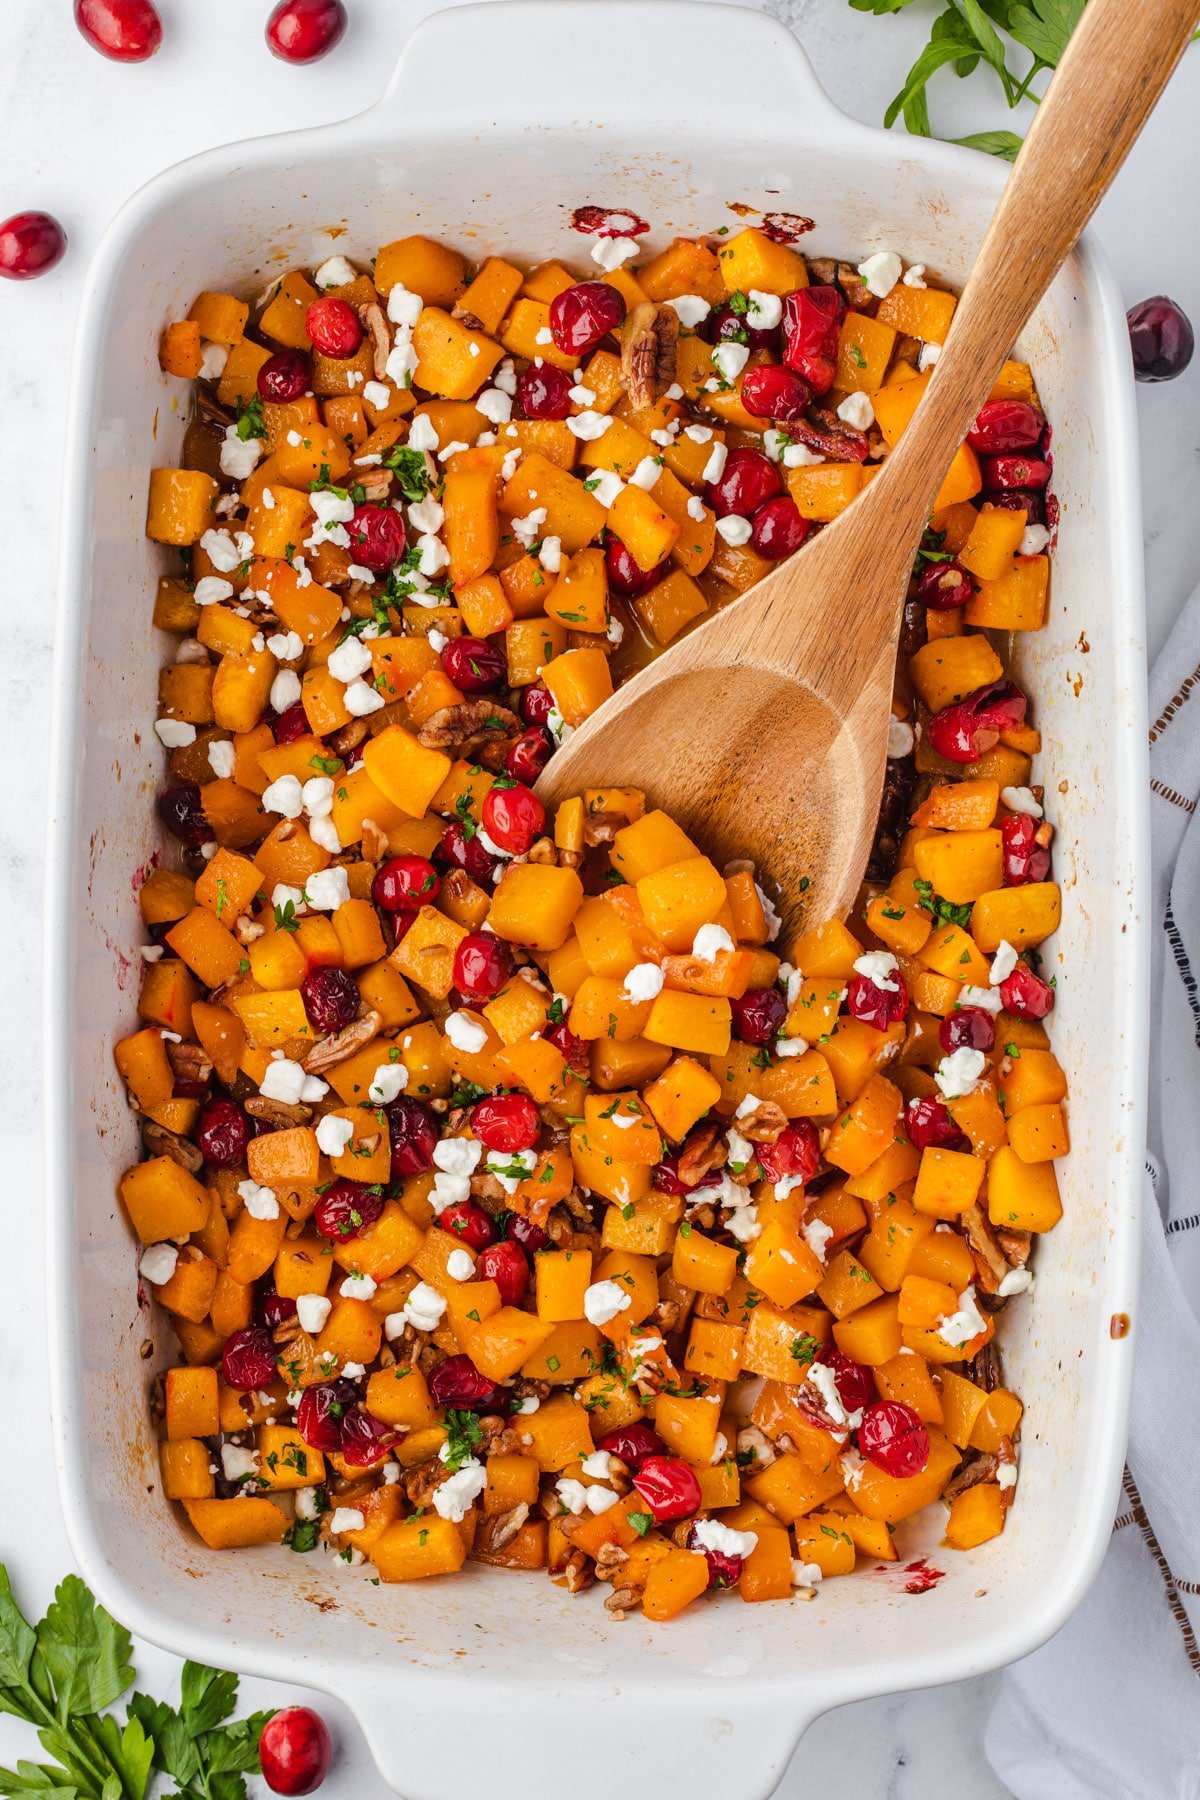 9x13 pan with a wooden spoon scooping out some butternut squash with cranberries, pecans, and goat cheese.